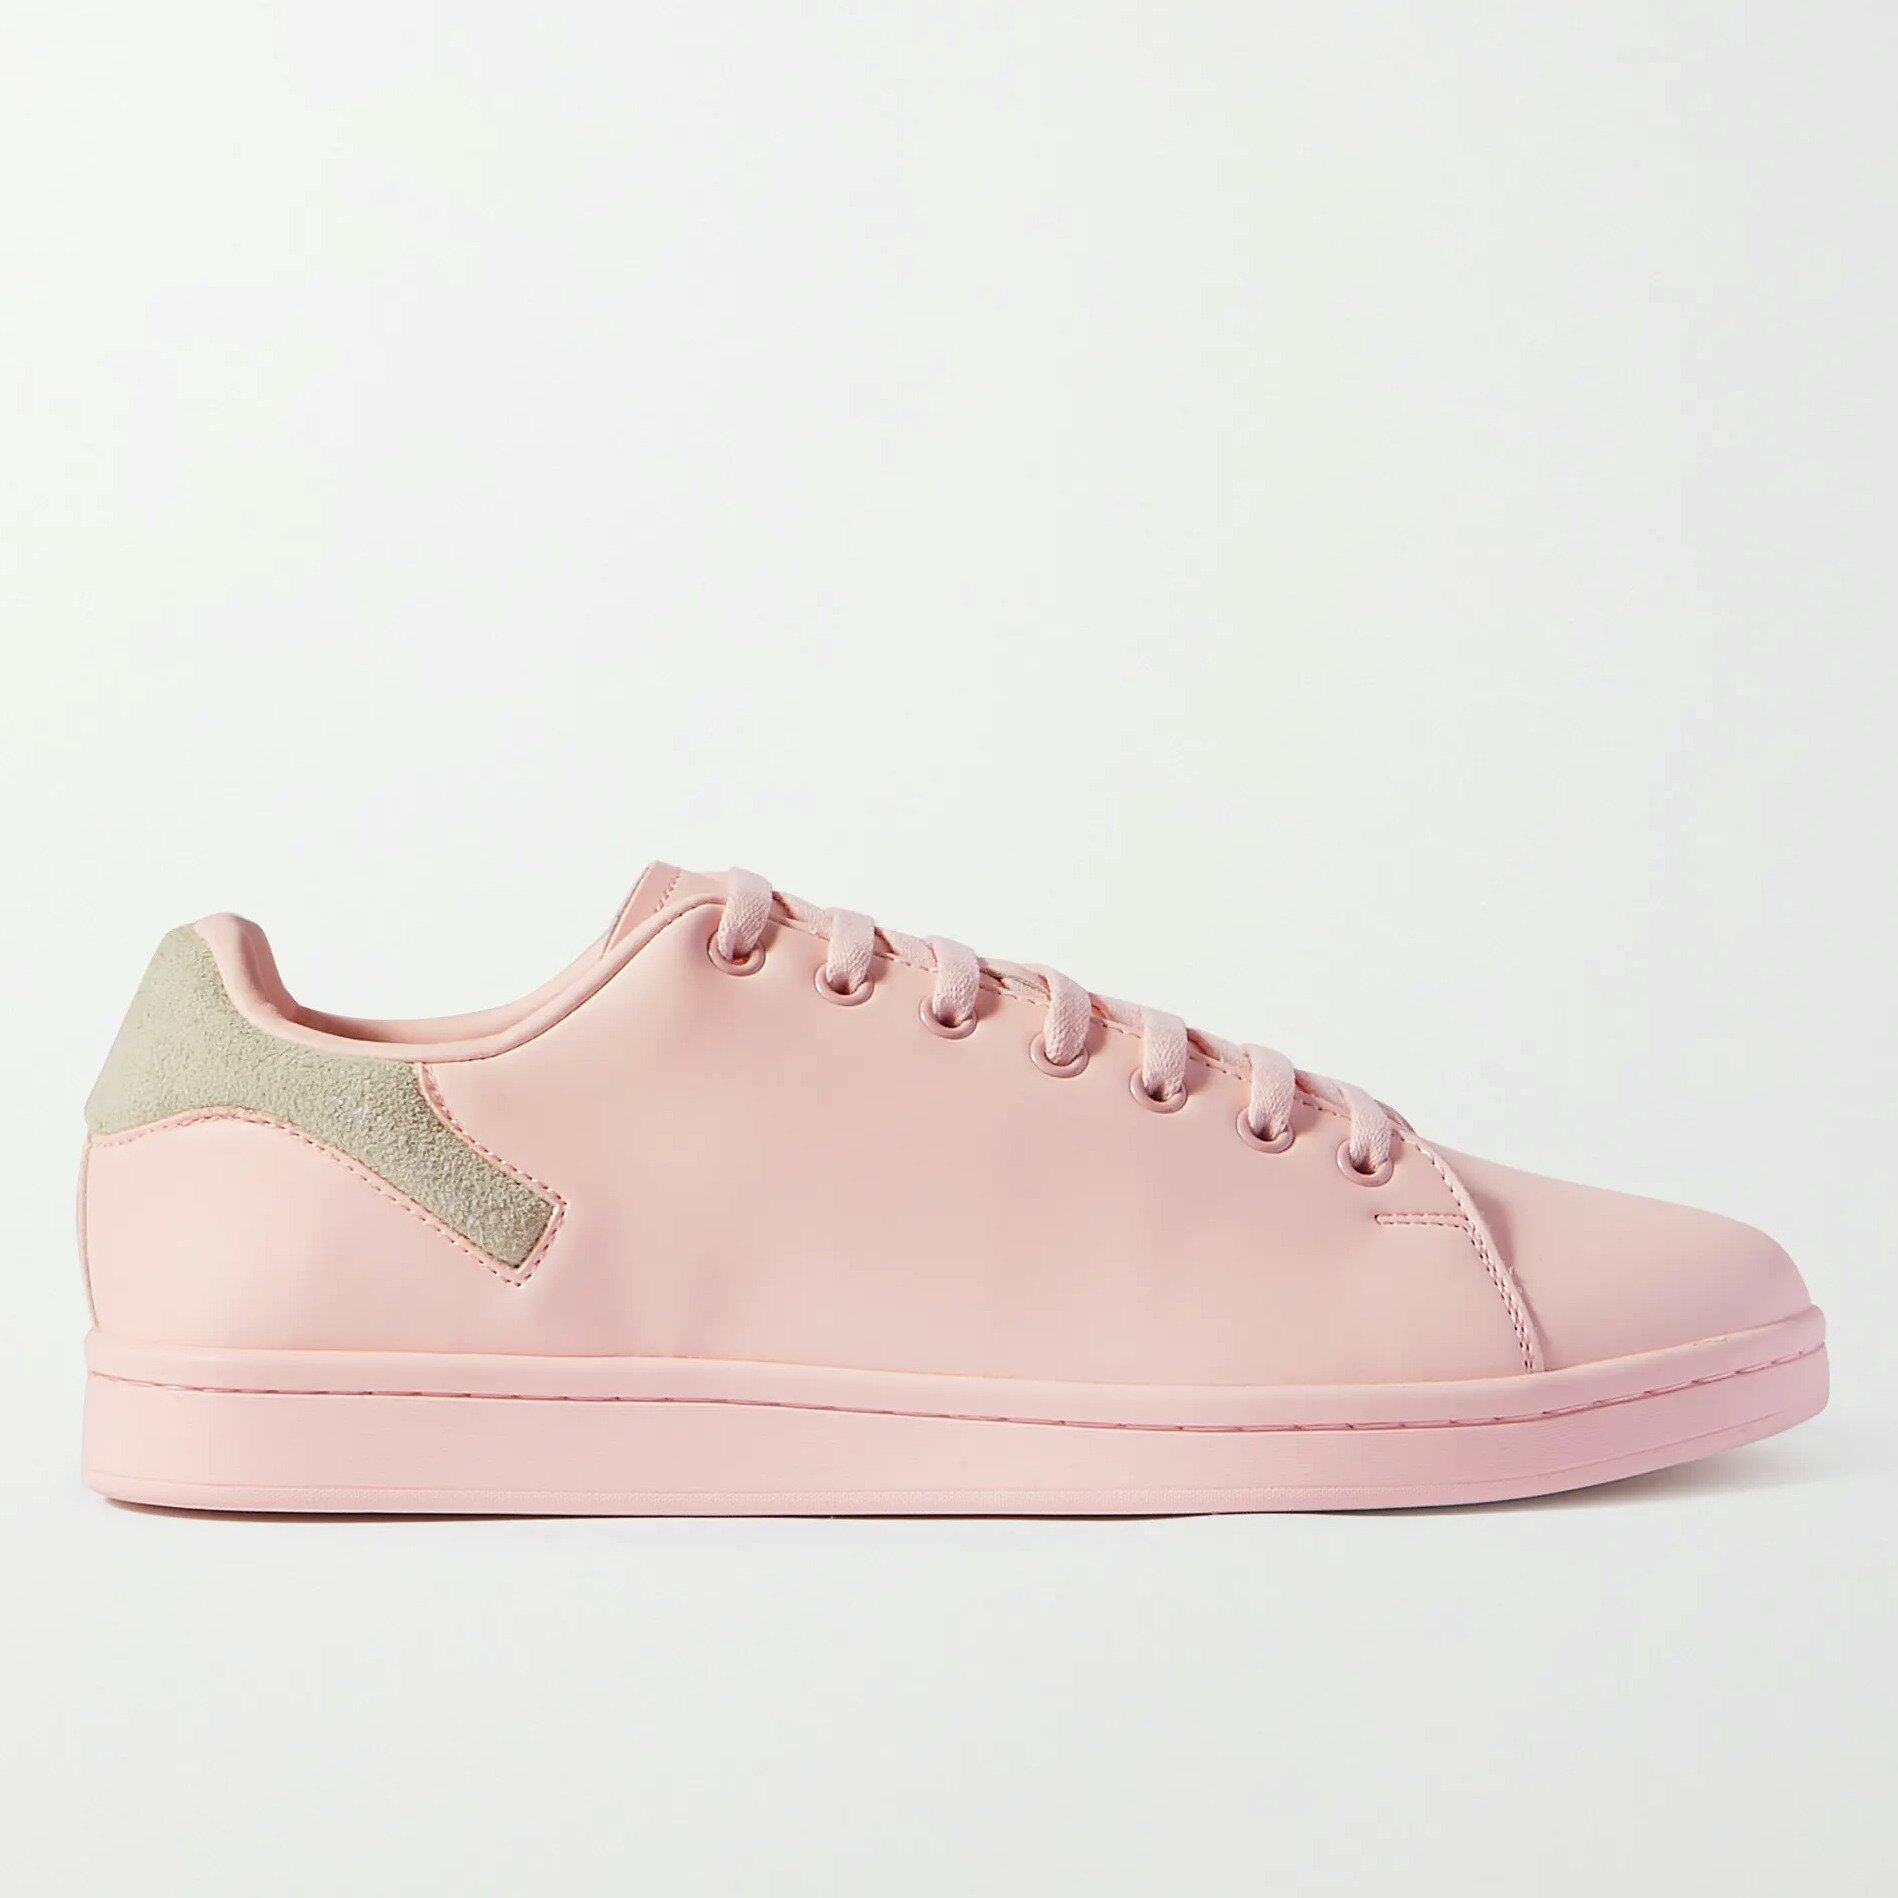 RAF SIMONS Orion Logo-Print Suede-Trimmed Faux Leather Sneakers